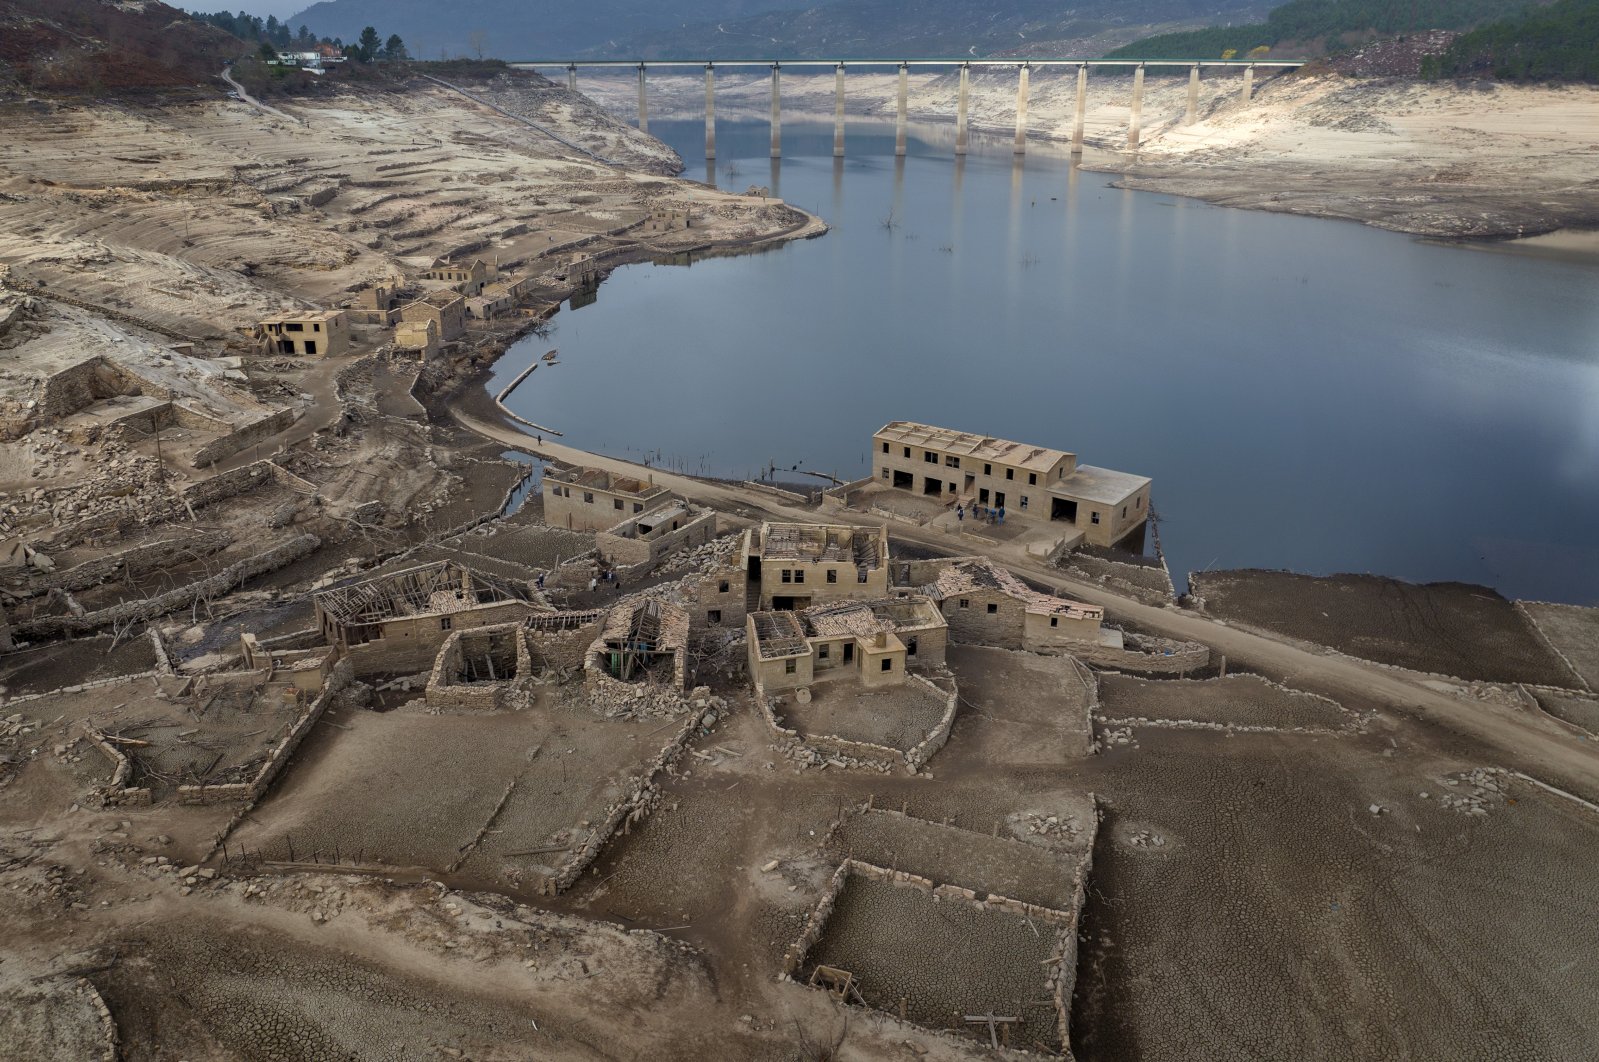 Parts of the old village of Aceredo, submerged three decades ago when a hydropower dam flooded the valley, are photographed emerging due to drought at the Lindoso reservoir, in northwestern Spain, Feb. 12, 2022. (AP Photo)